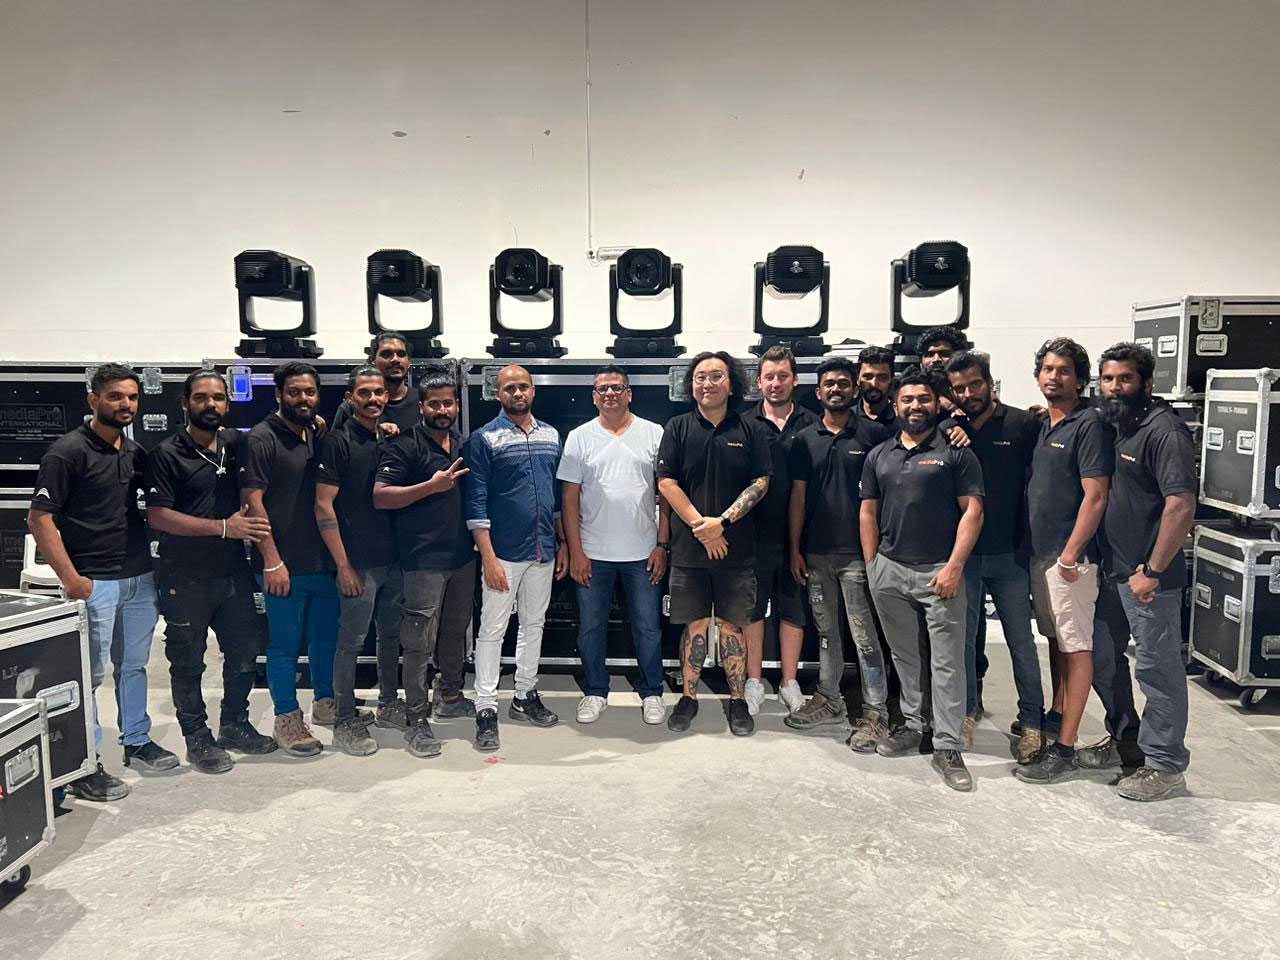 Media Pro Group team in the warehouse in Saudi Arabia with their new Ayrton Cobras